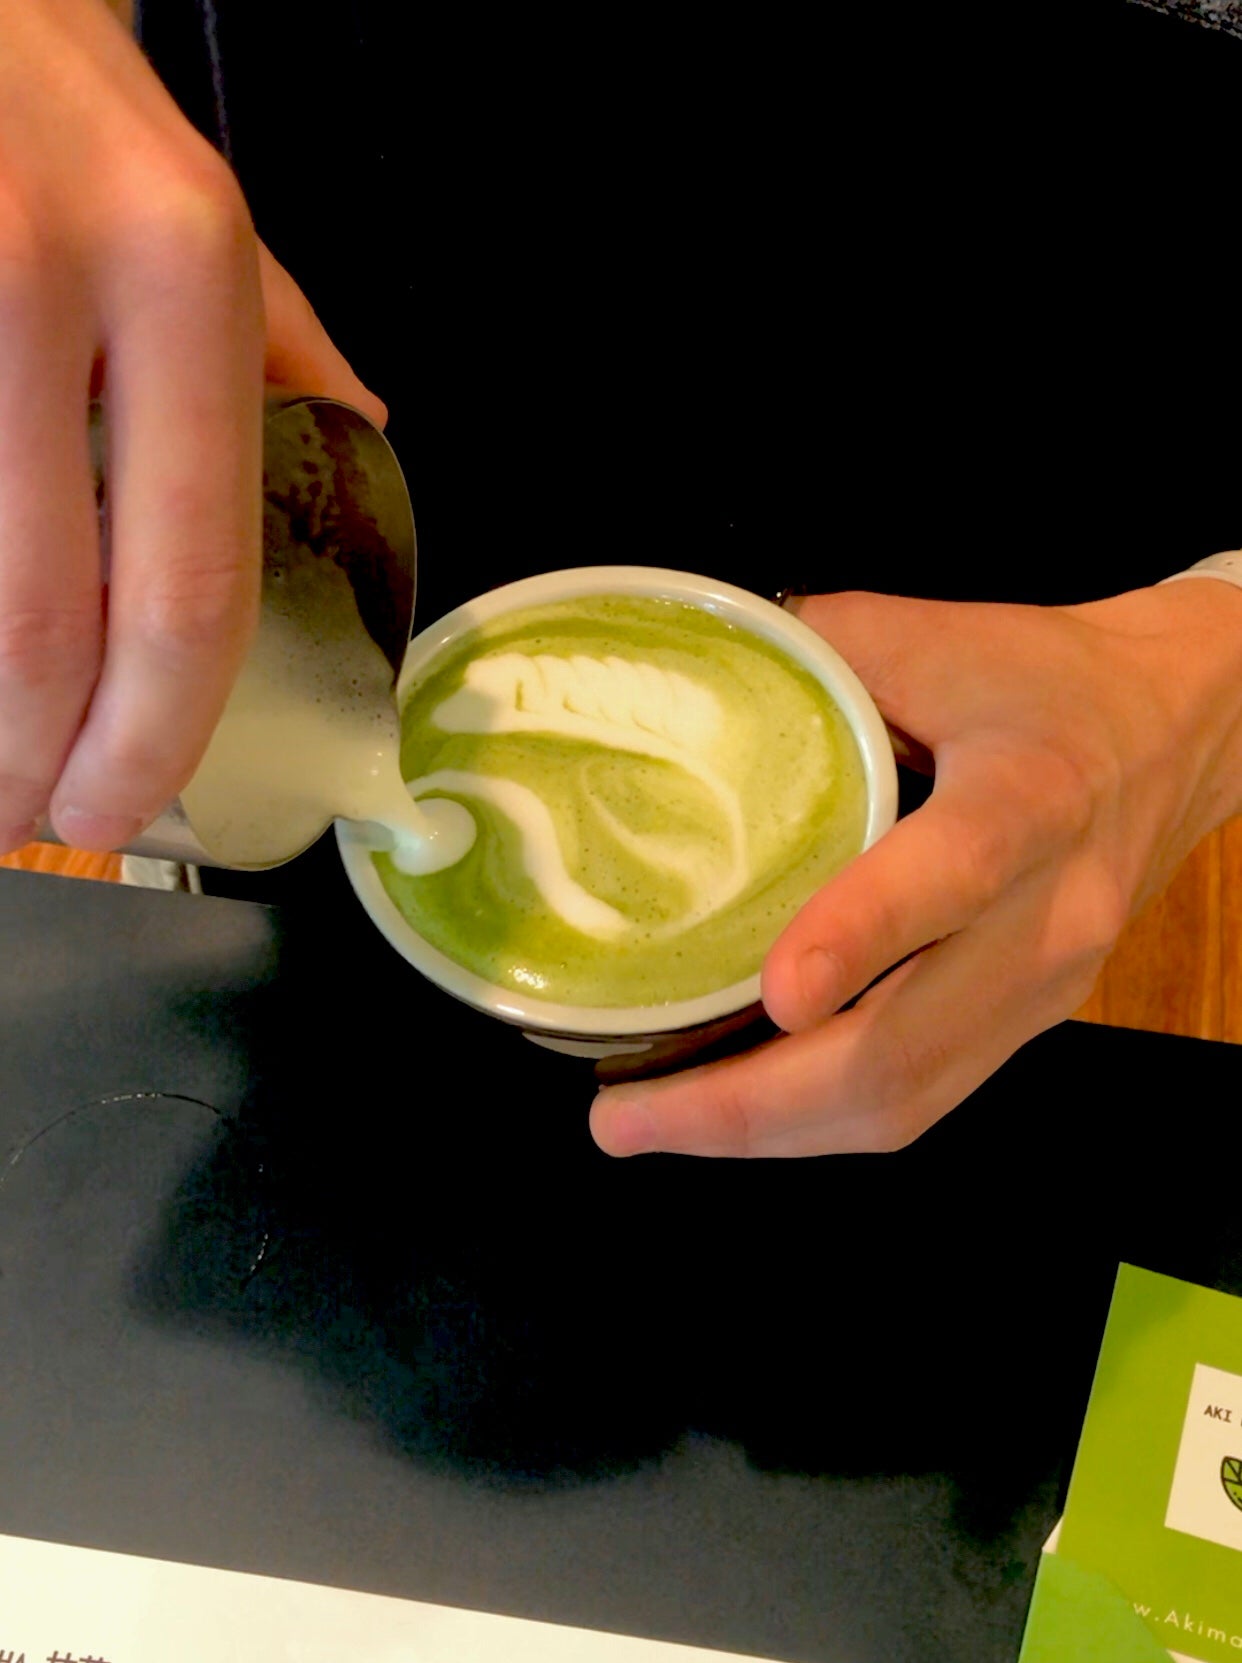 Why Do Matcha And Milk Never Go Together?